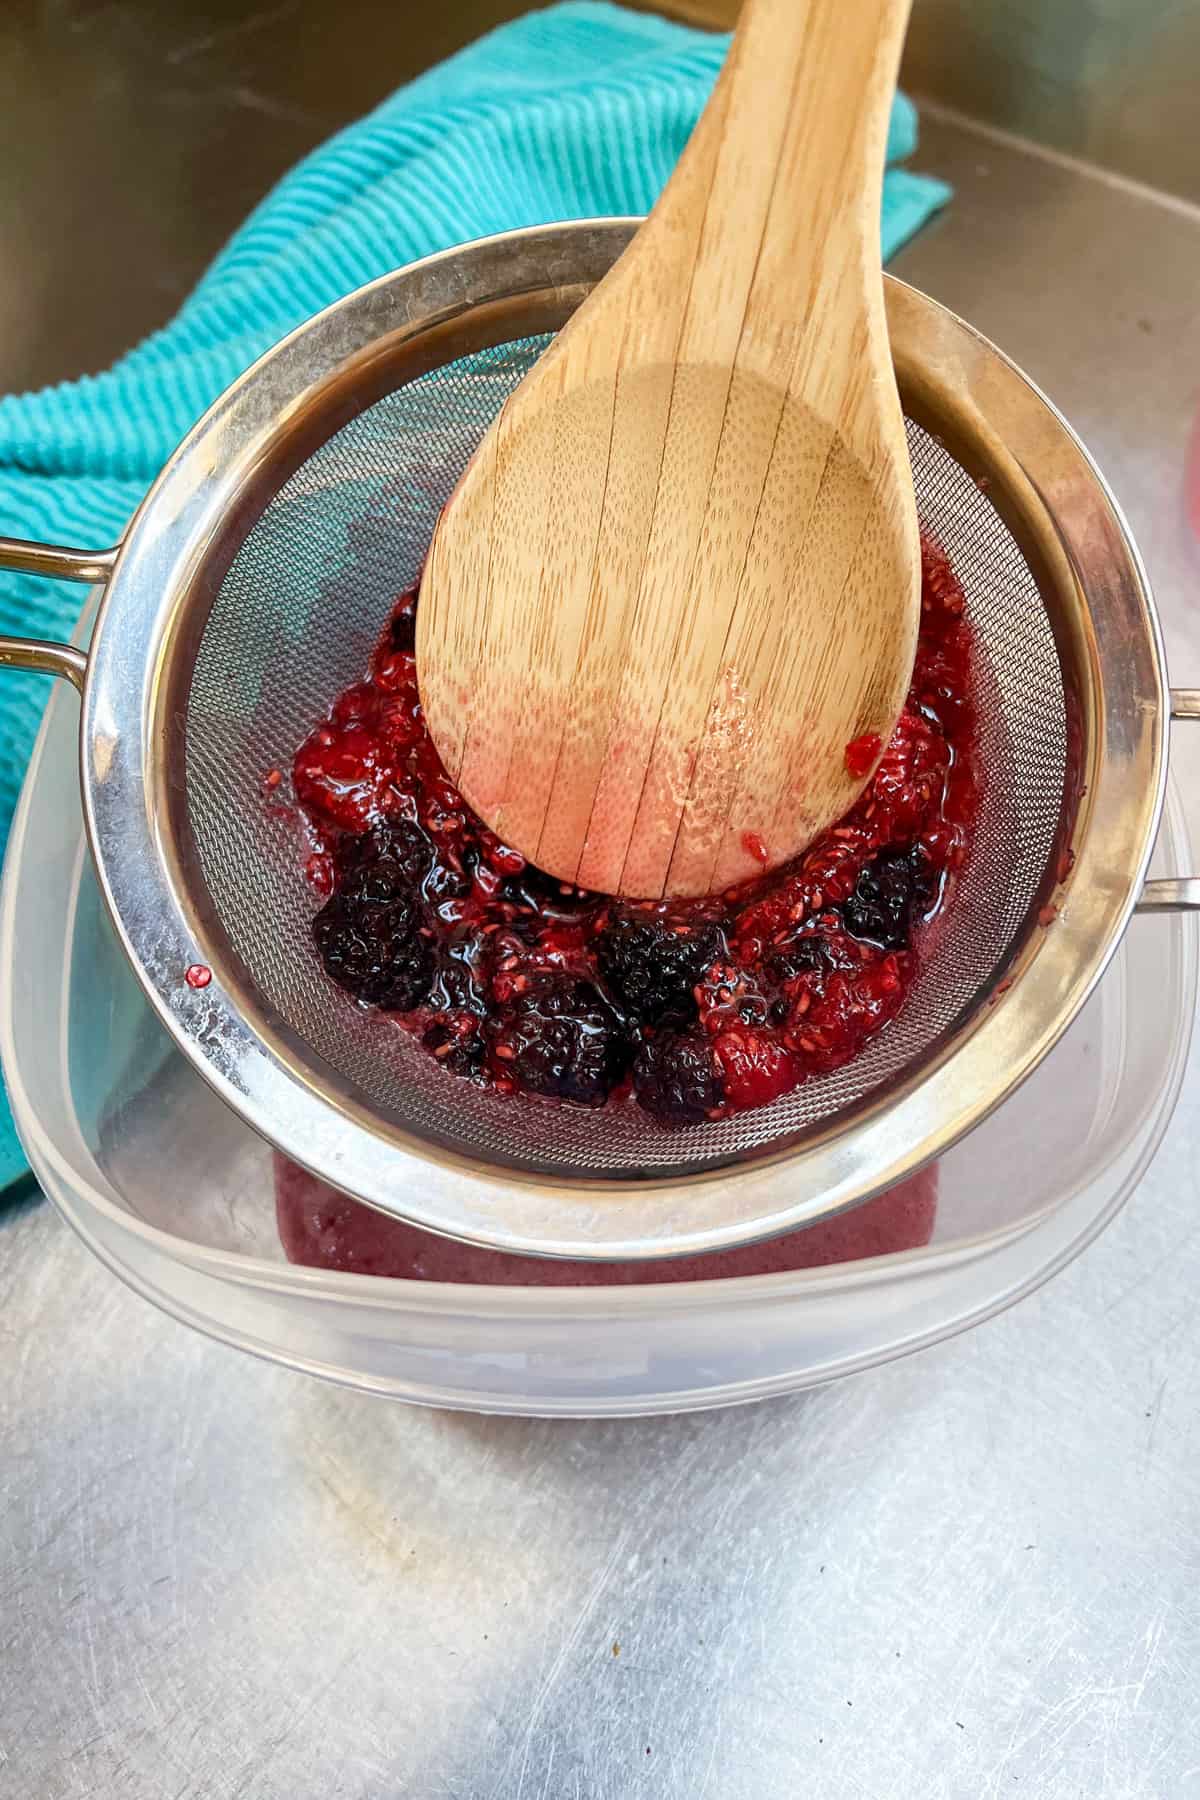 macerated berries in a mesh strainer being press on by a wooden spoon so the juices are pushed down into the container below